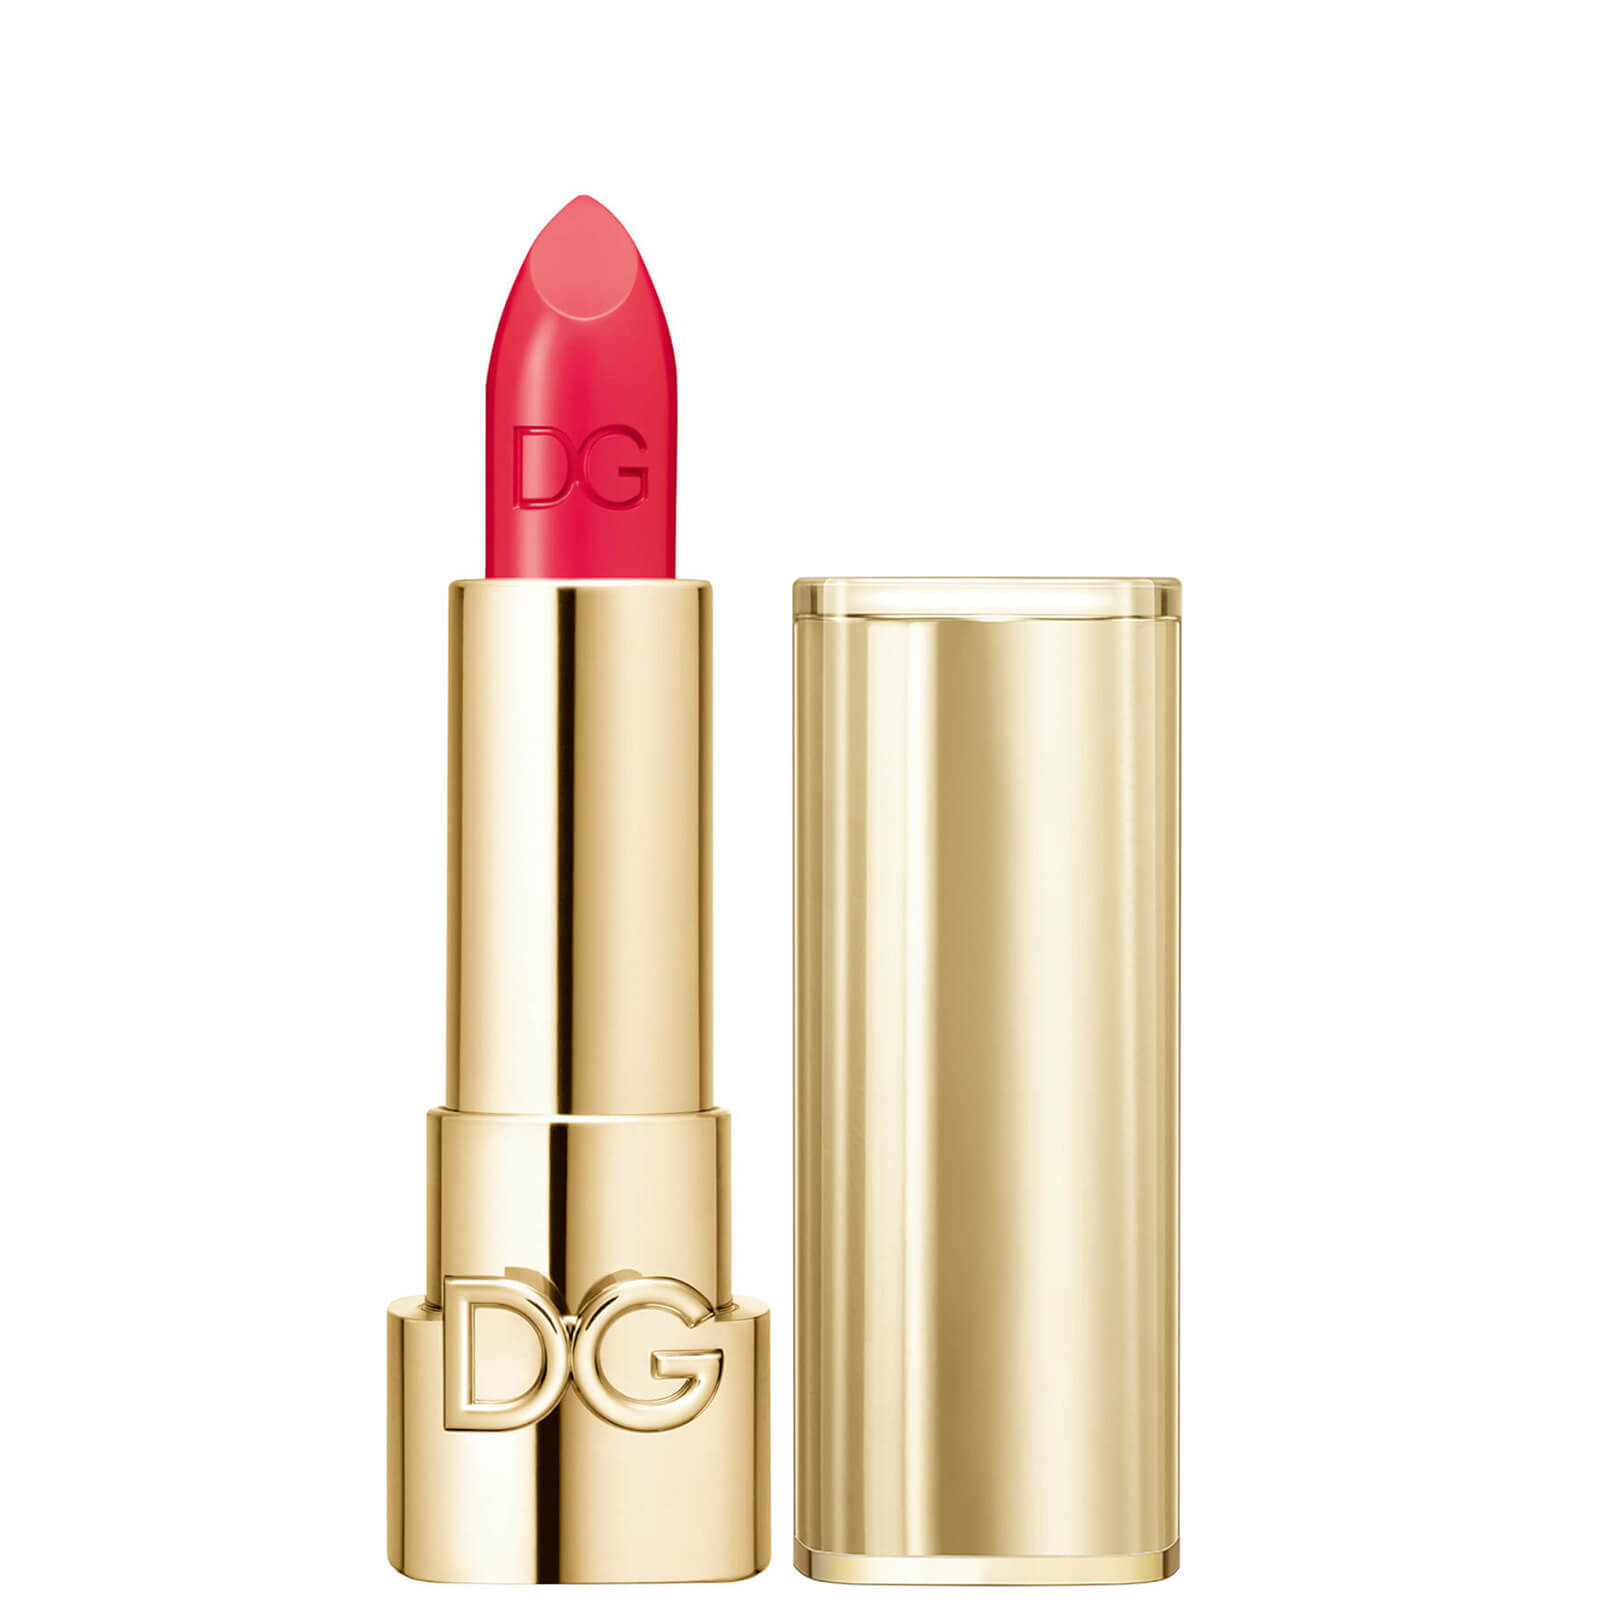 Dolce&Gabbana The Only One Lipstick + Cap (Gold) (Various Shades) - 410 Pop Watermelon